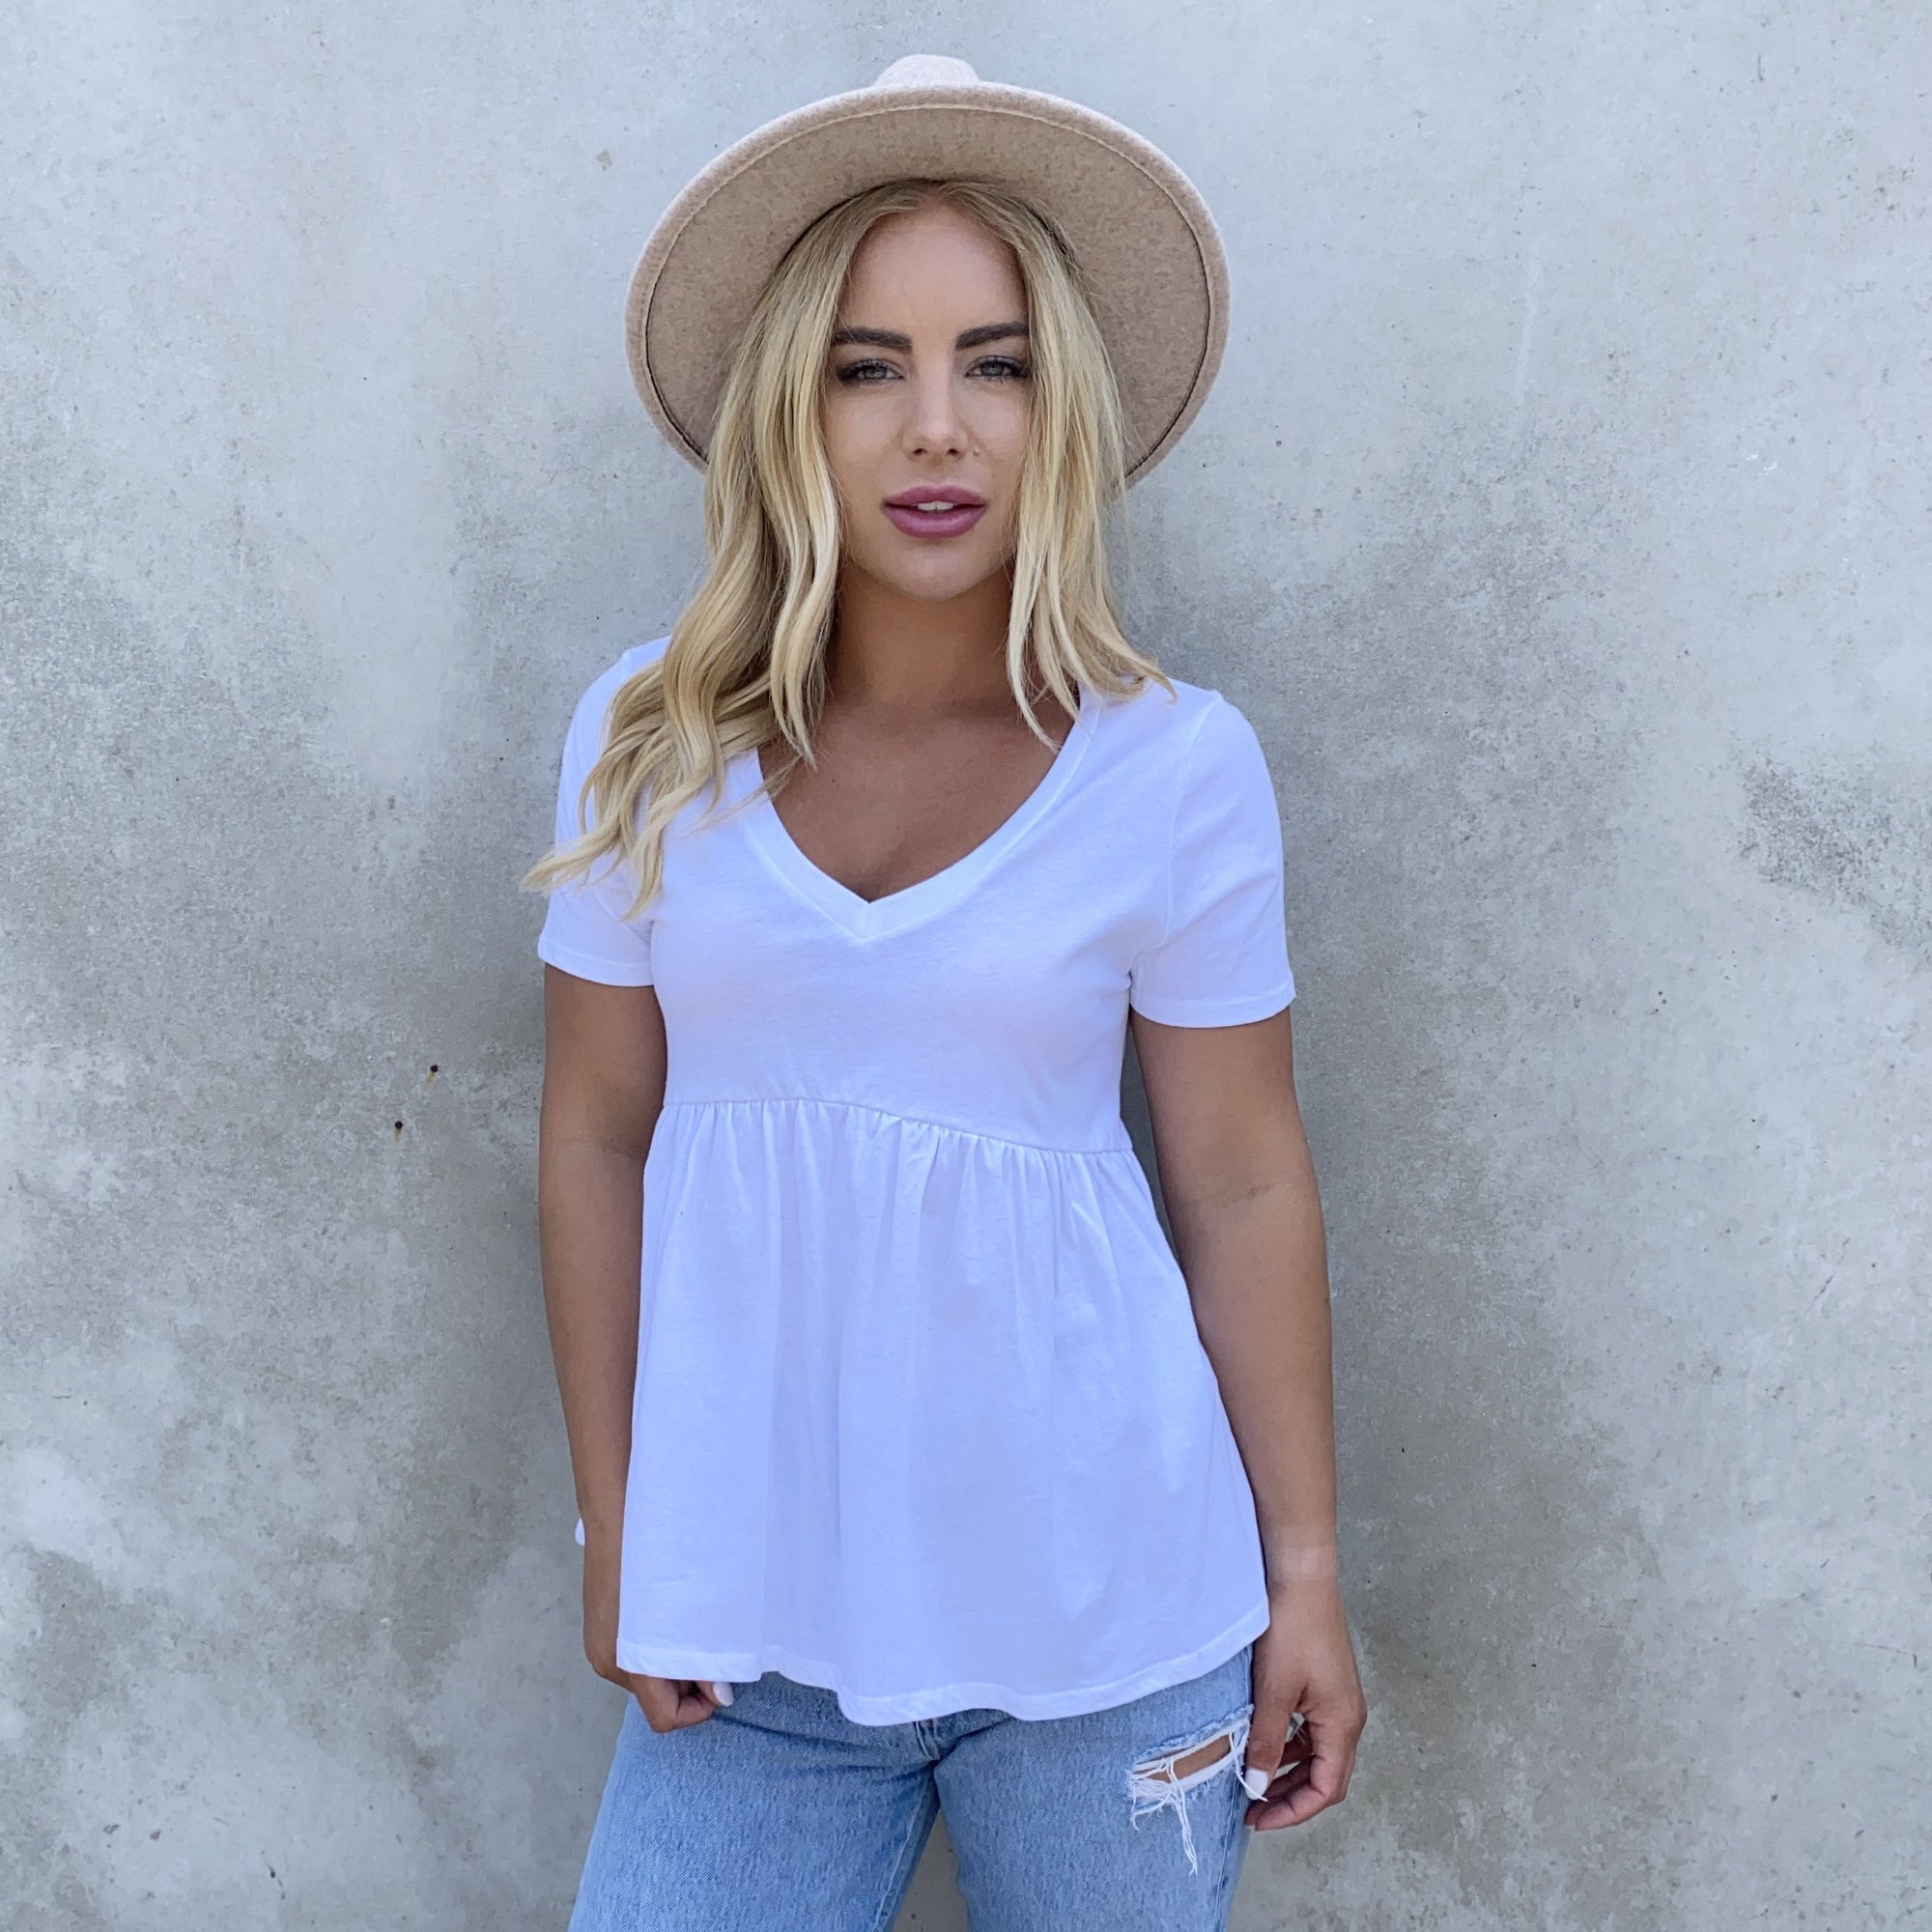 Cotton Babydoll Tunic Top in White - Dainty Hooligan